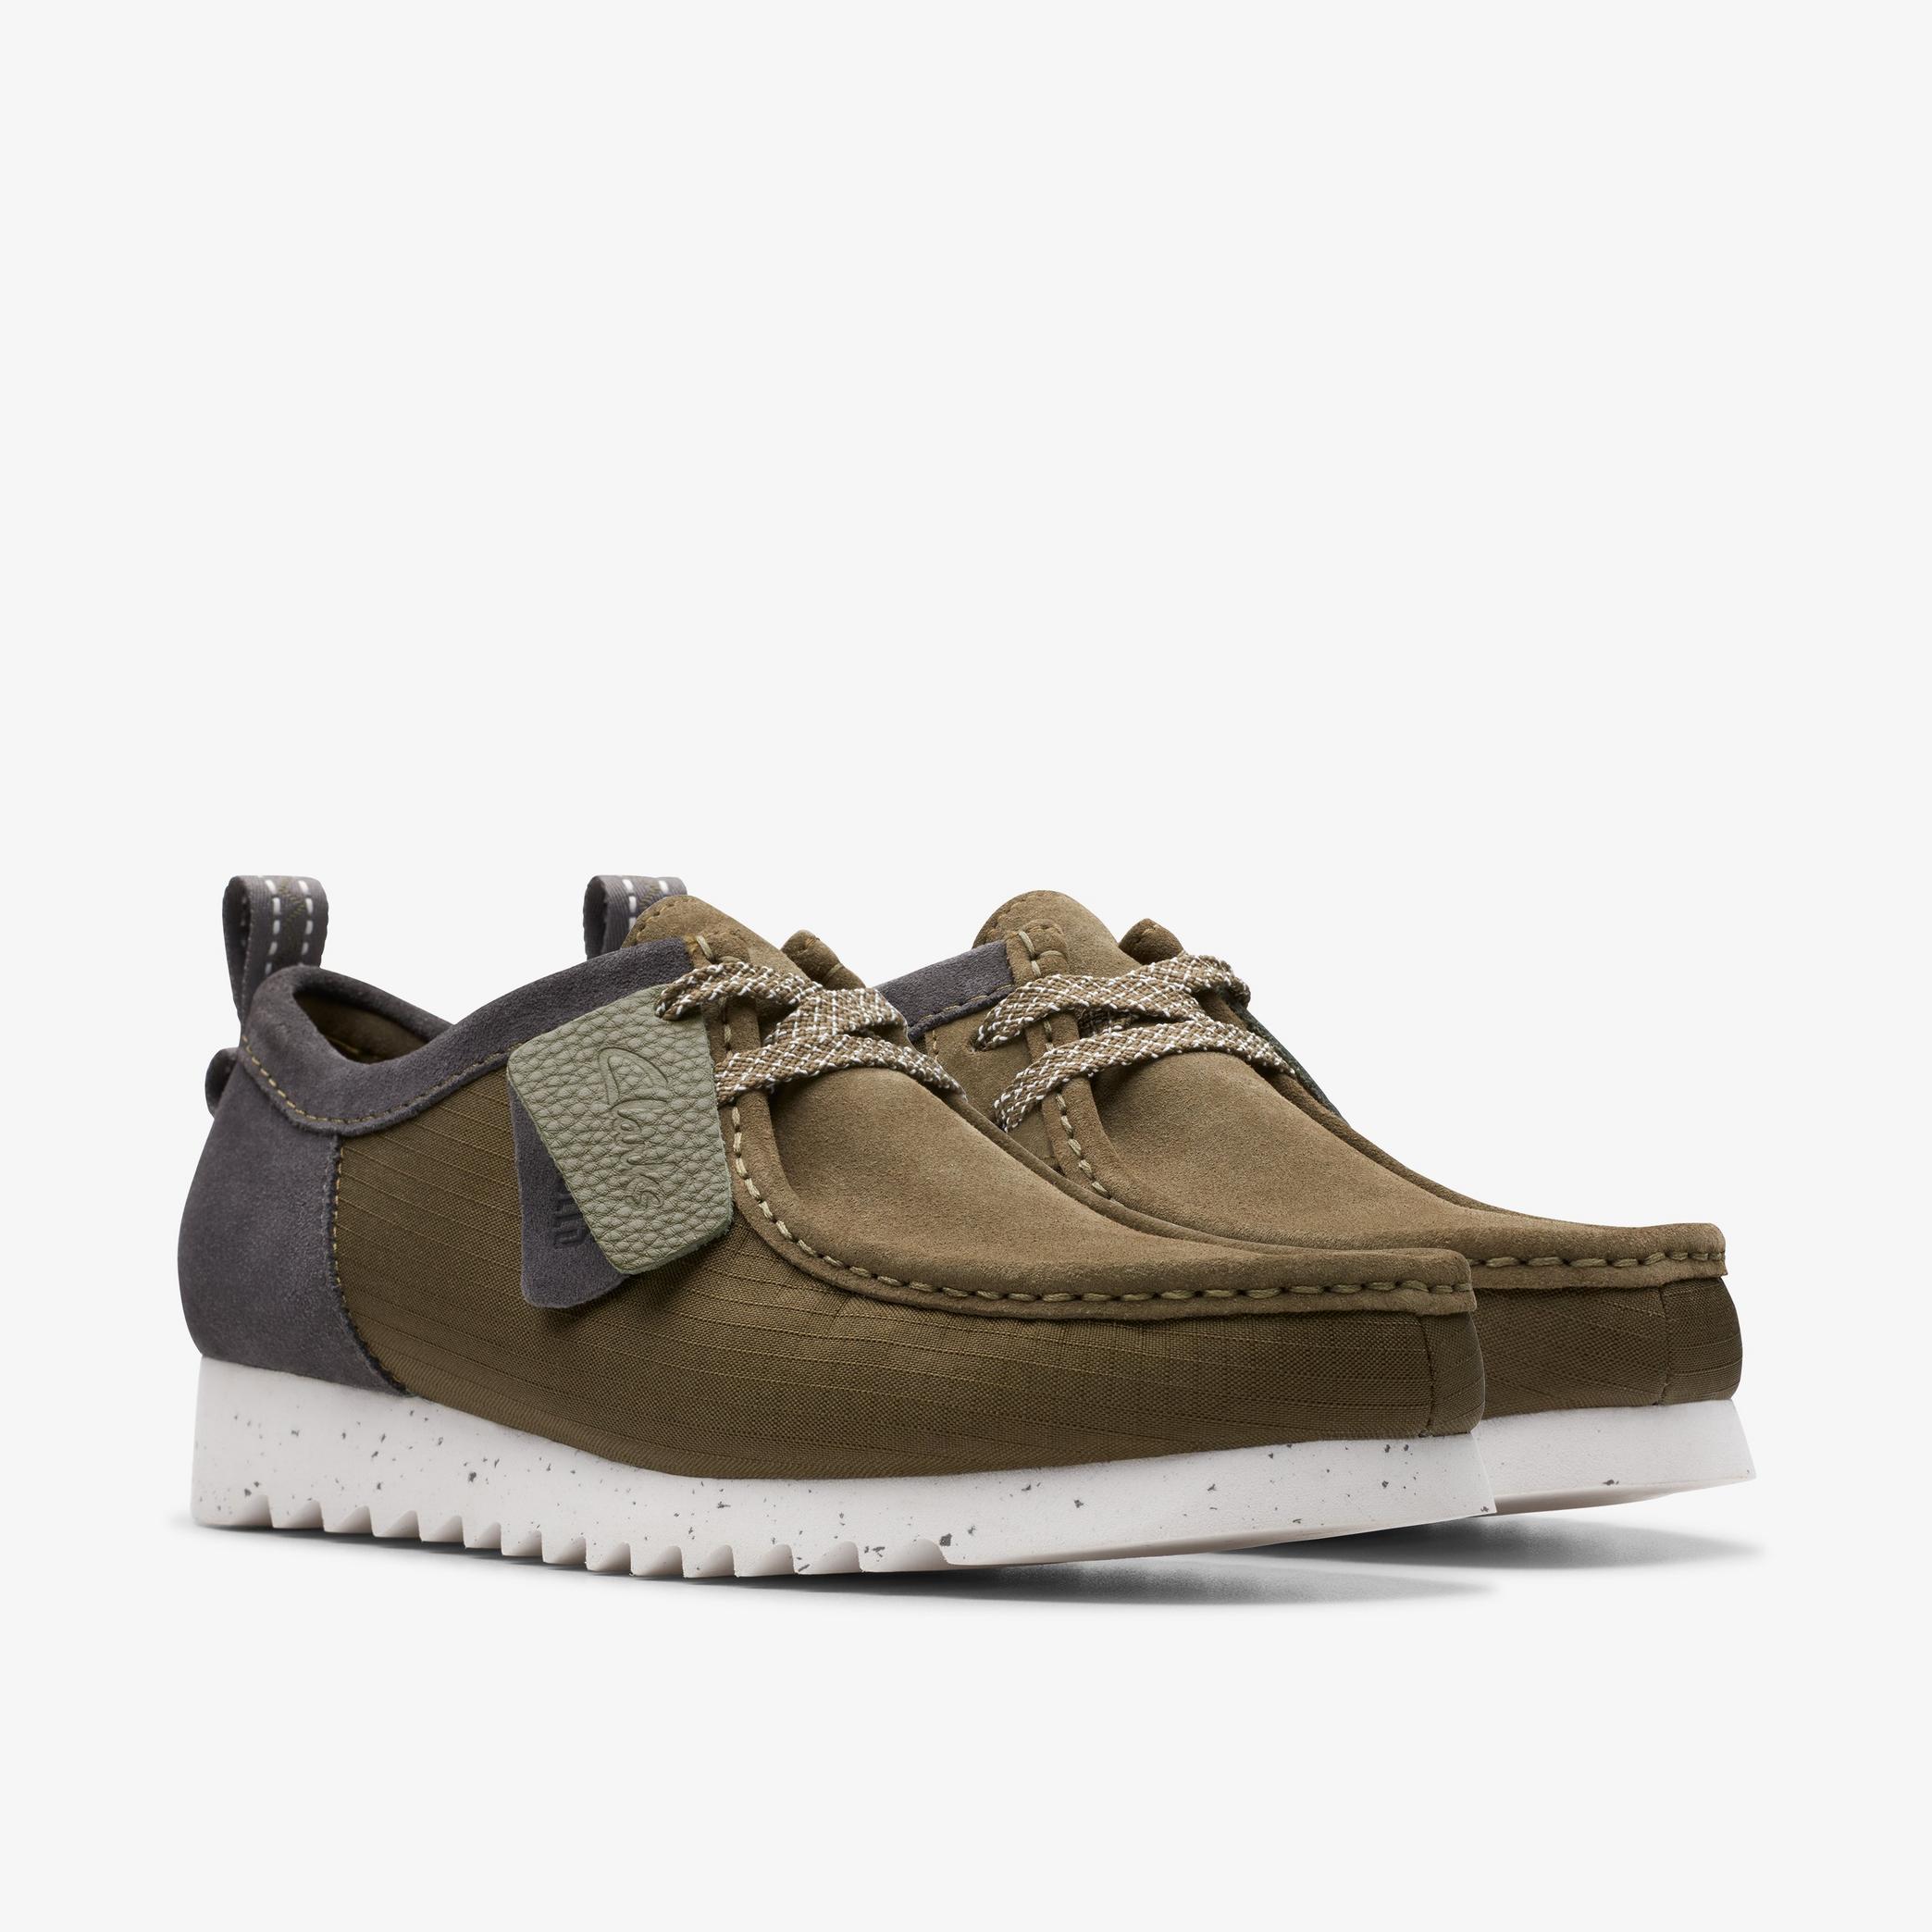 Wallabee FTRE Lo Olive Combination Moccasins, view 4 of 6